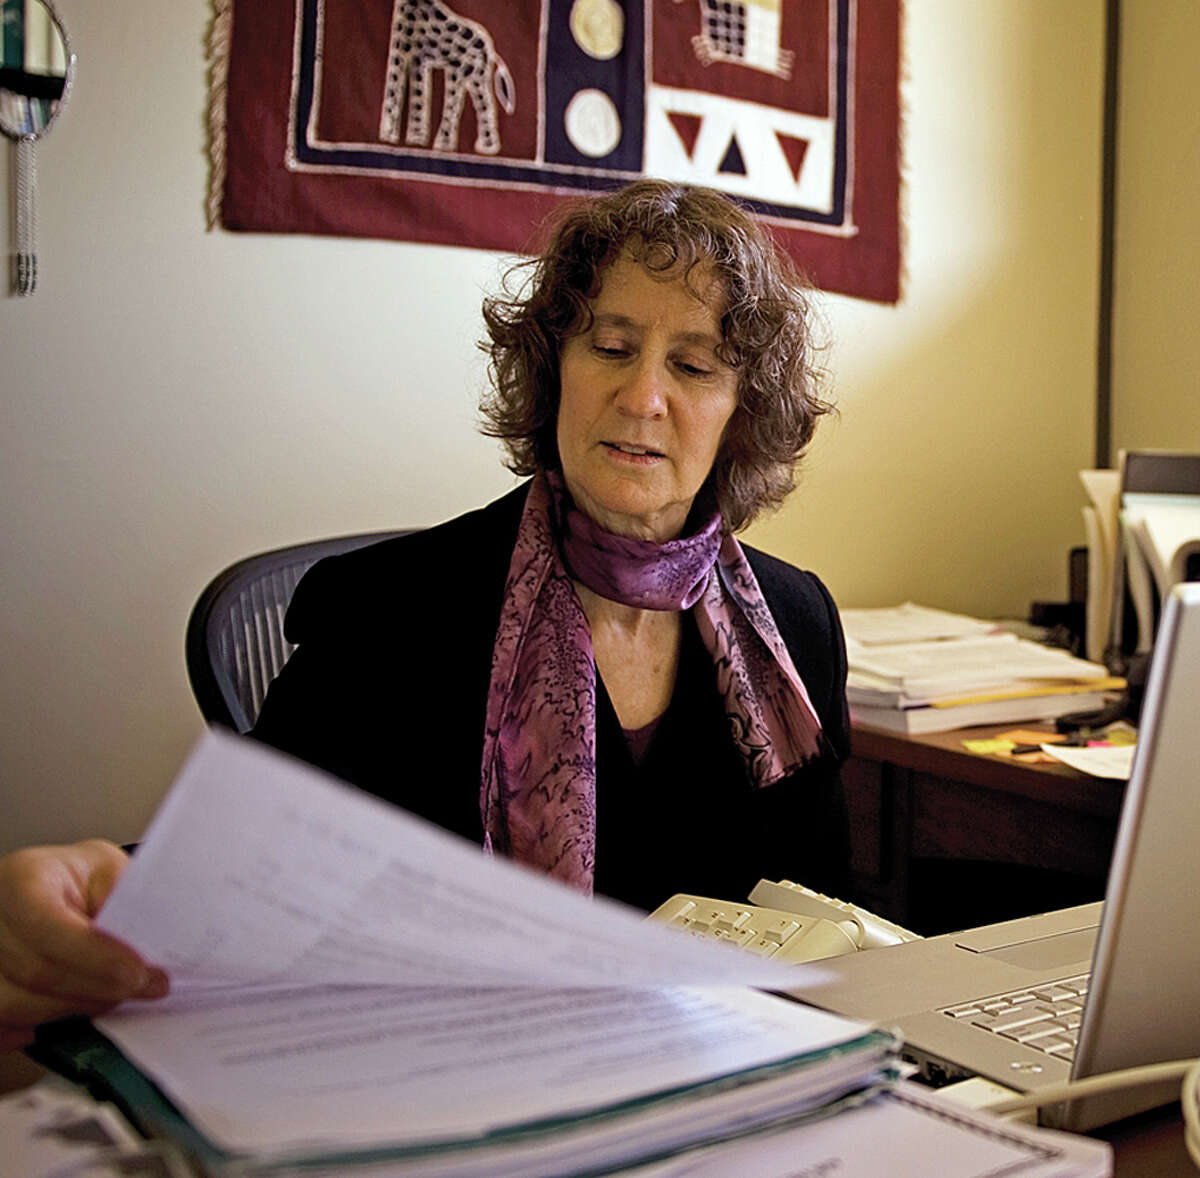 In this undated photo provided by the UC Davis Health System, Irva Hertz-Picciotto is shown. Irva Hertz-Picciotto, a researcher at the University of California, Davis, is leading a study into what sparks autism disorders. More than $1 billion has been spent over the past decade searching for autism?’s causes. (AP Photo/UC Davis Health System)